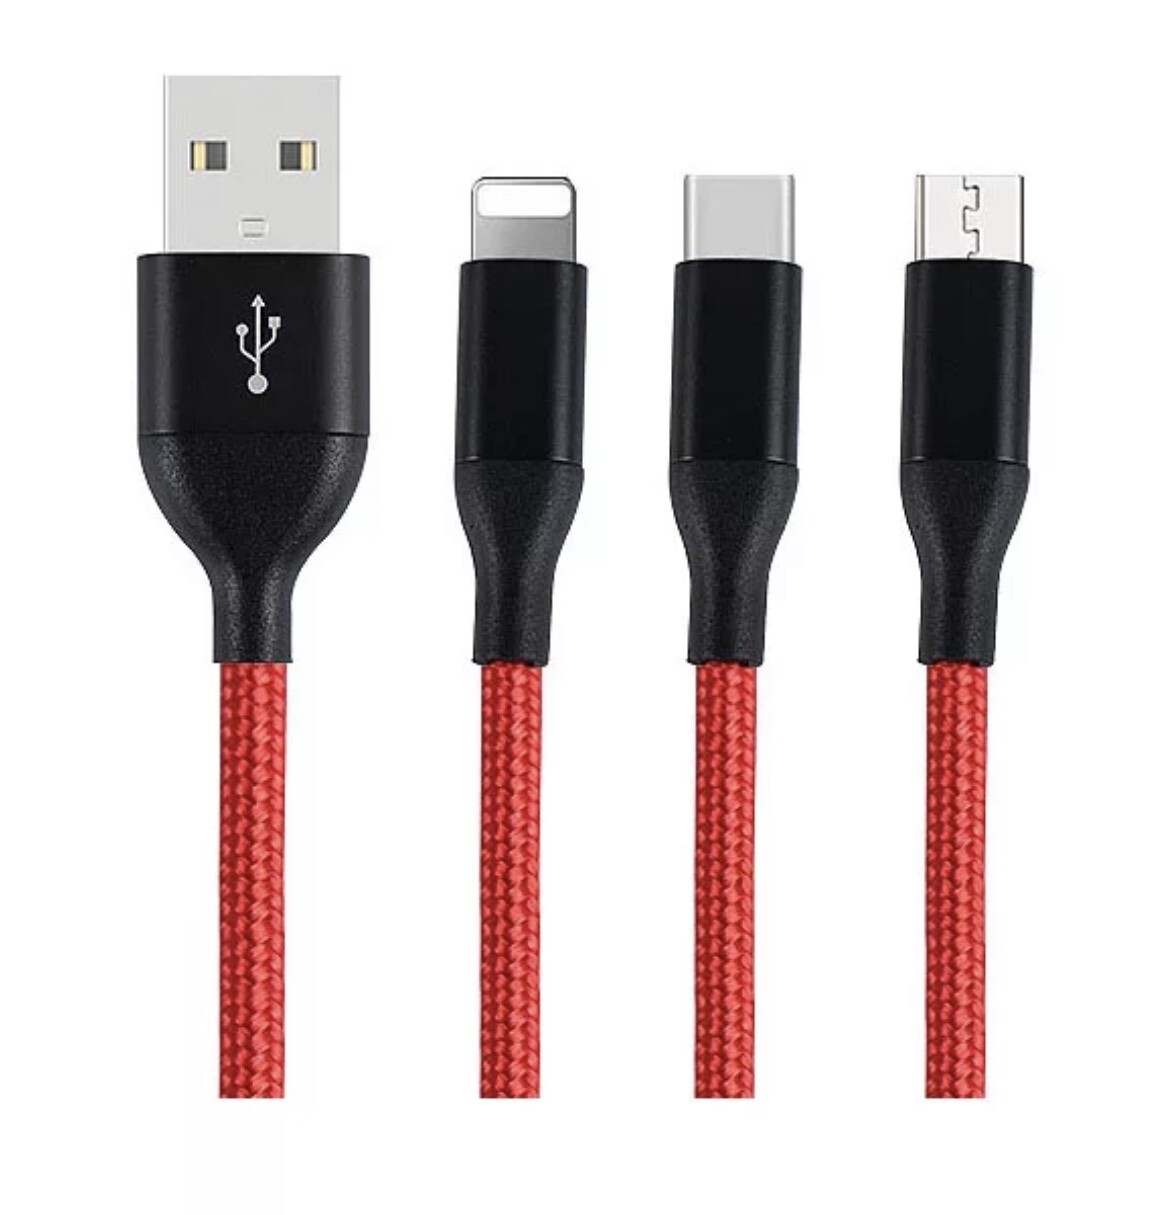 3 in 1 Charging cord 3ft long